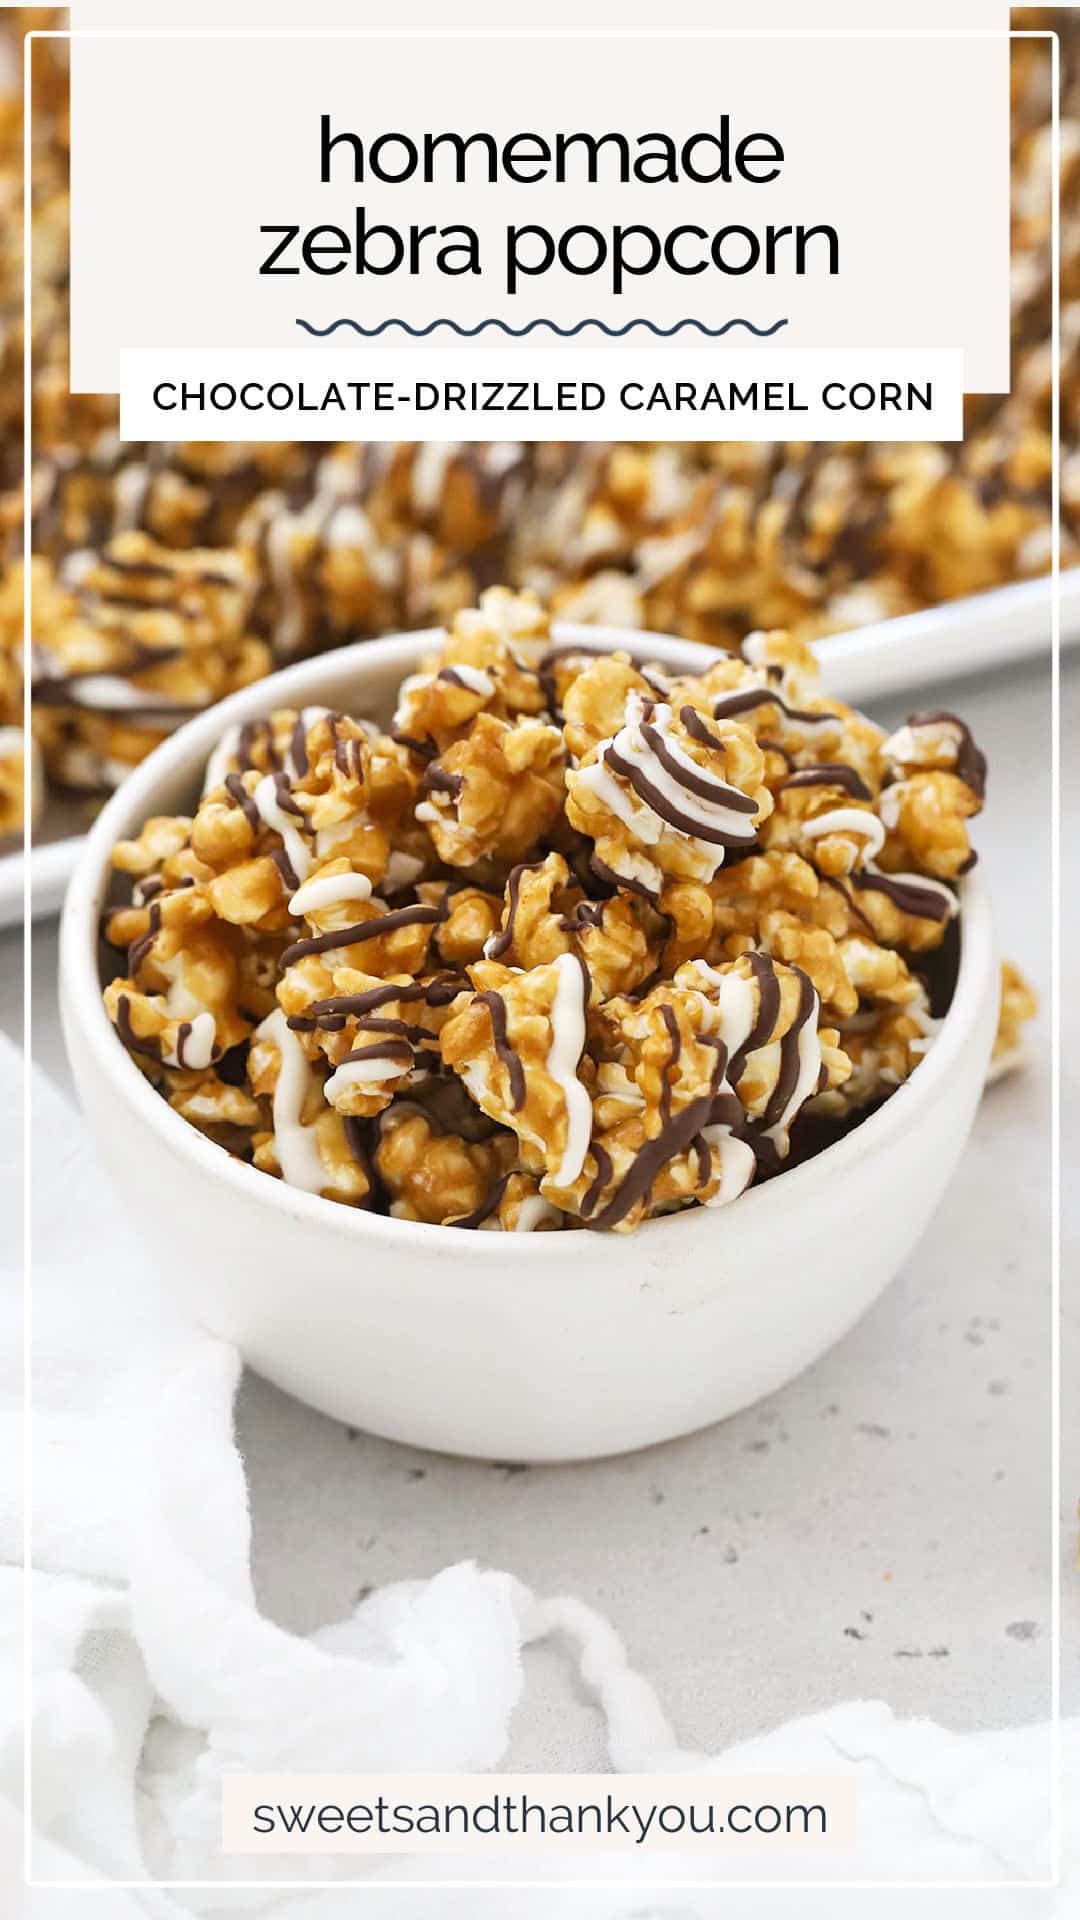 Learn how to make homemade zebra popcorn with our easy recipe! This chocolate drizzled caramel corn is always a hit! (Gluten-Free!) / zebra caramel popcorn / caramel corn drizzled with chocolate / chocolate drizzled caramel corn / chocolate drizzled caramel popcorn / zebra corn recipe / is zebra popcorn gluten-free / gluten free popcorn recipe / gluten free holiday treat